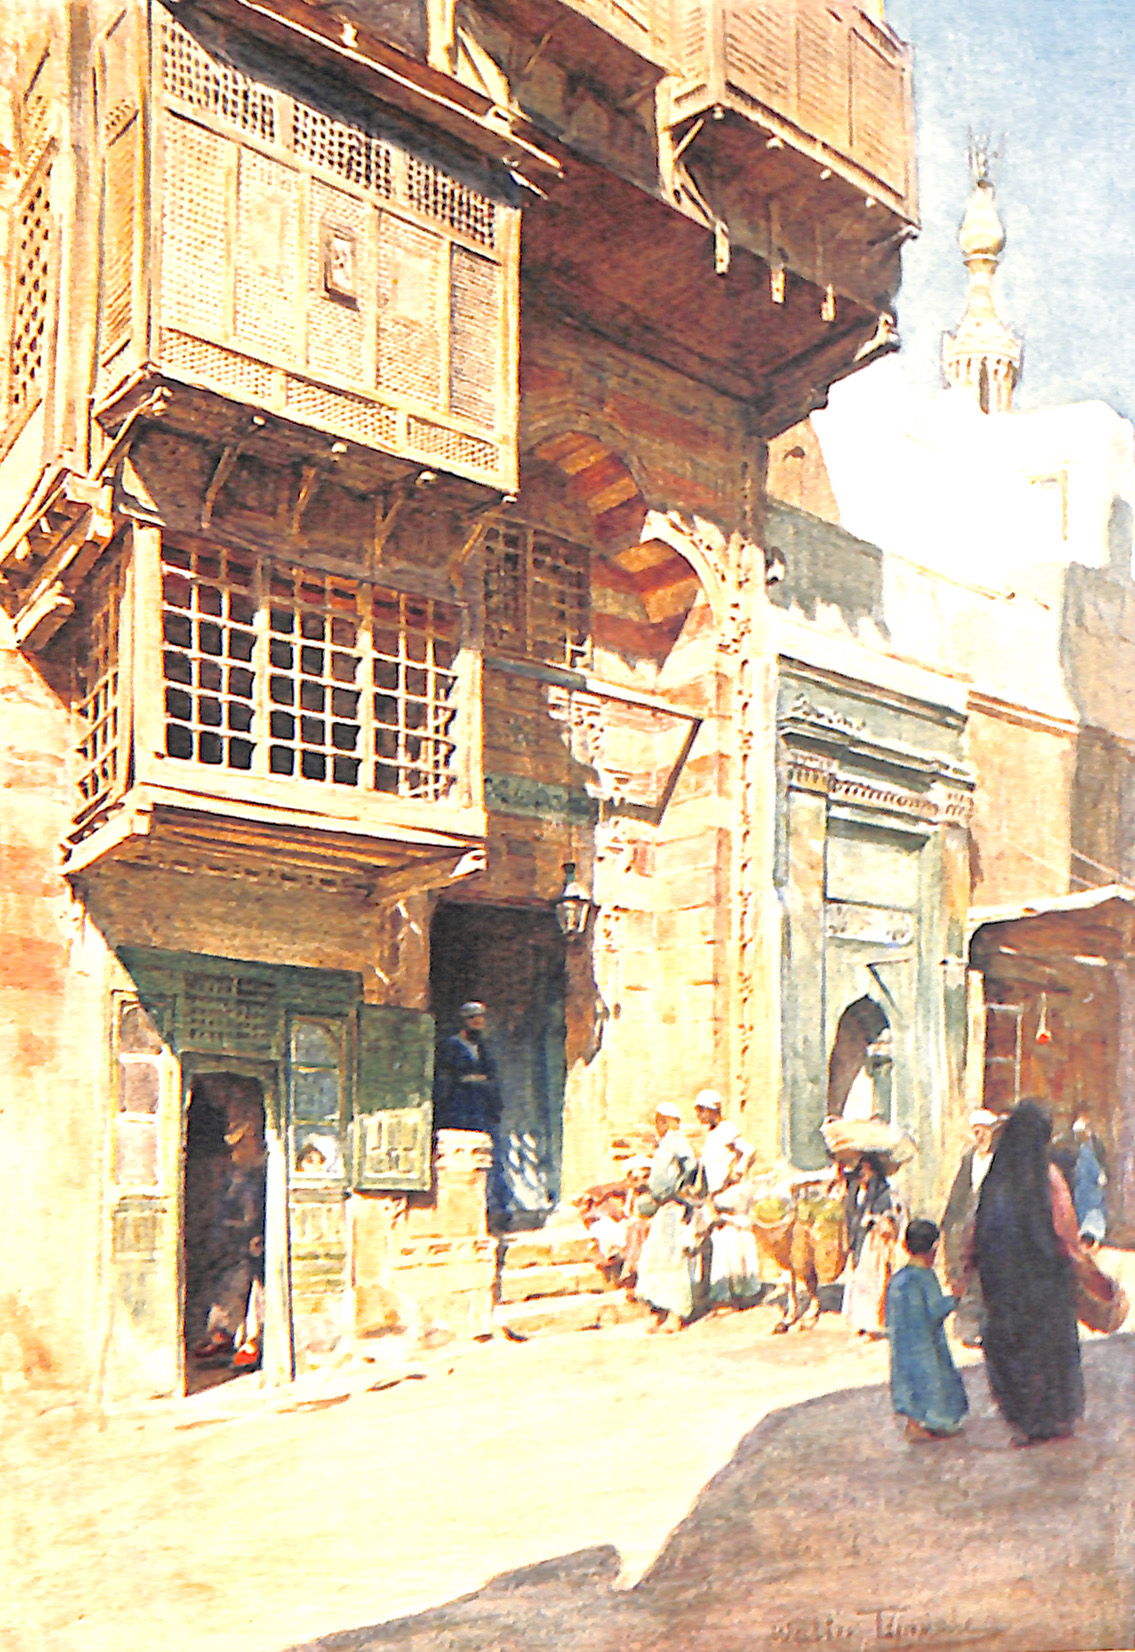 The Sheykhs House in the Nahassin, Cairo